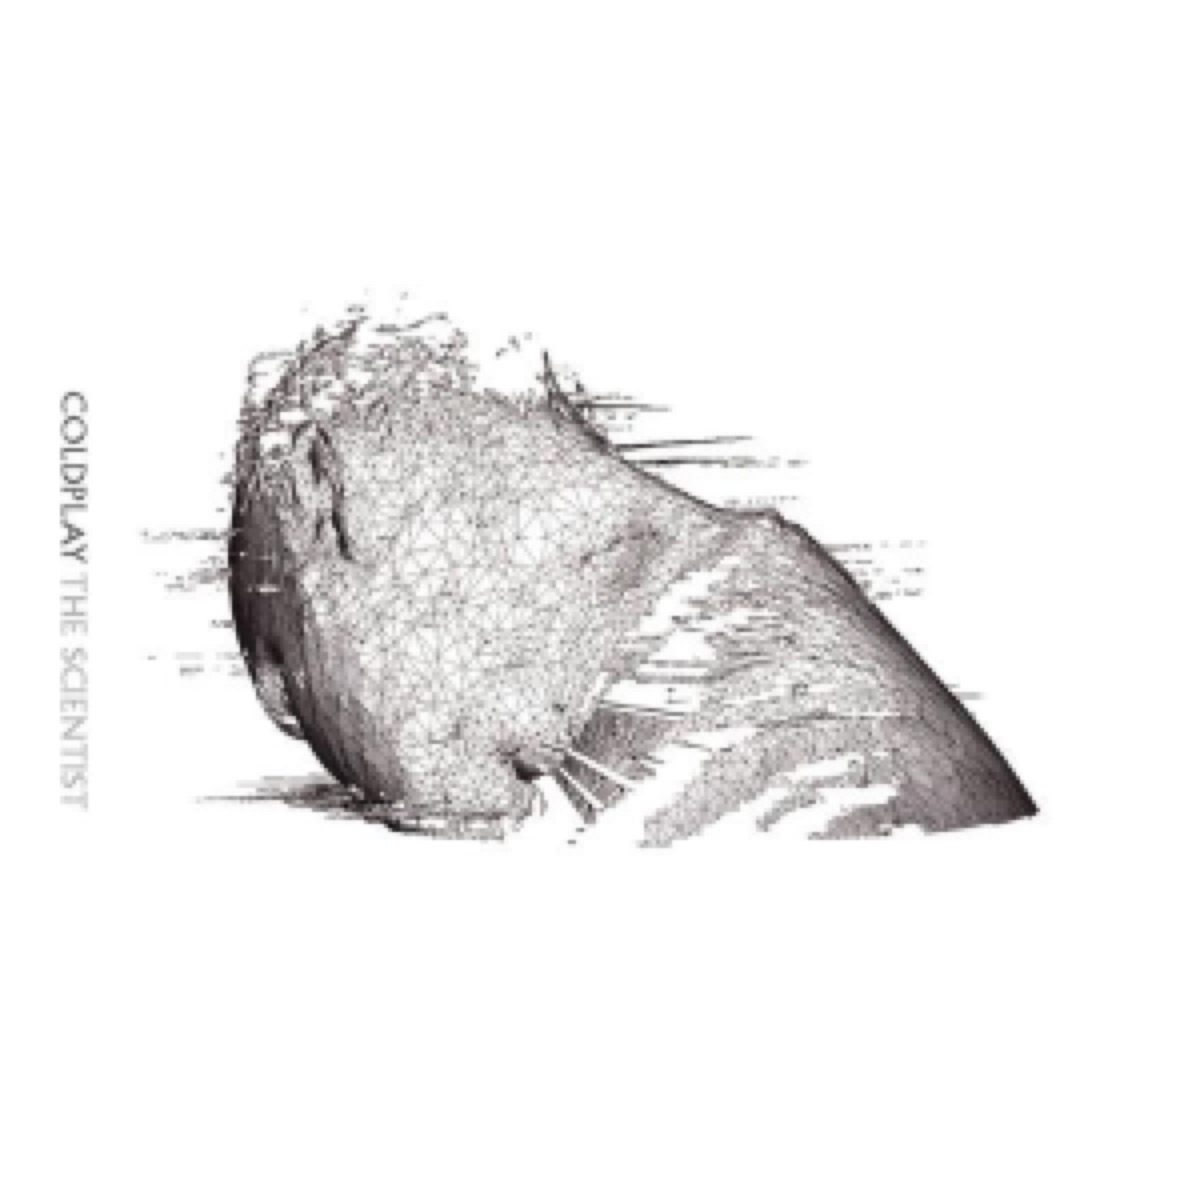 cover art for coldplay's the scientist, best breakup songs